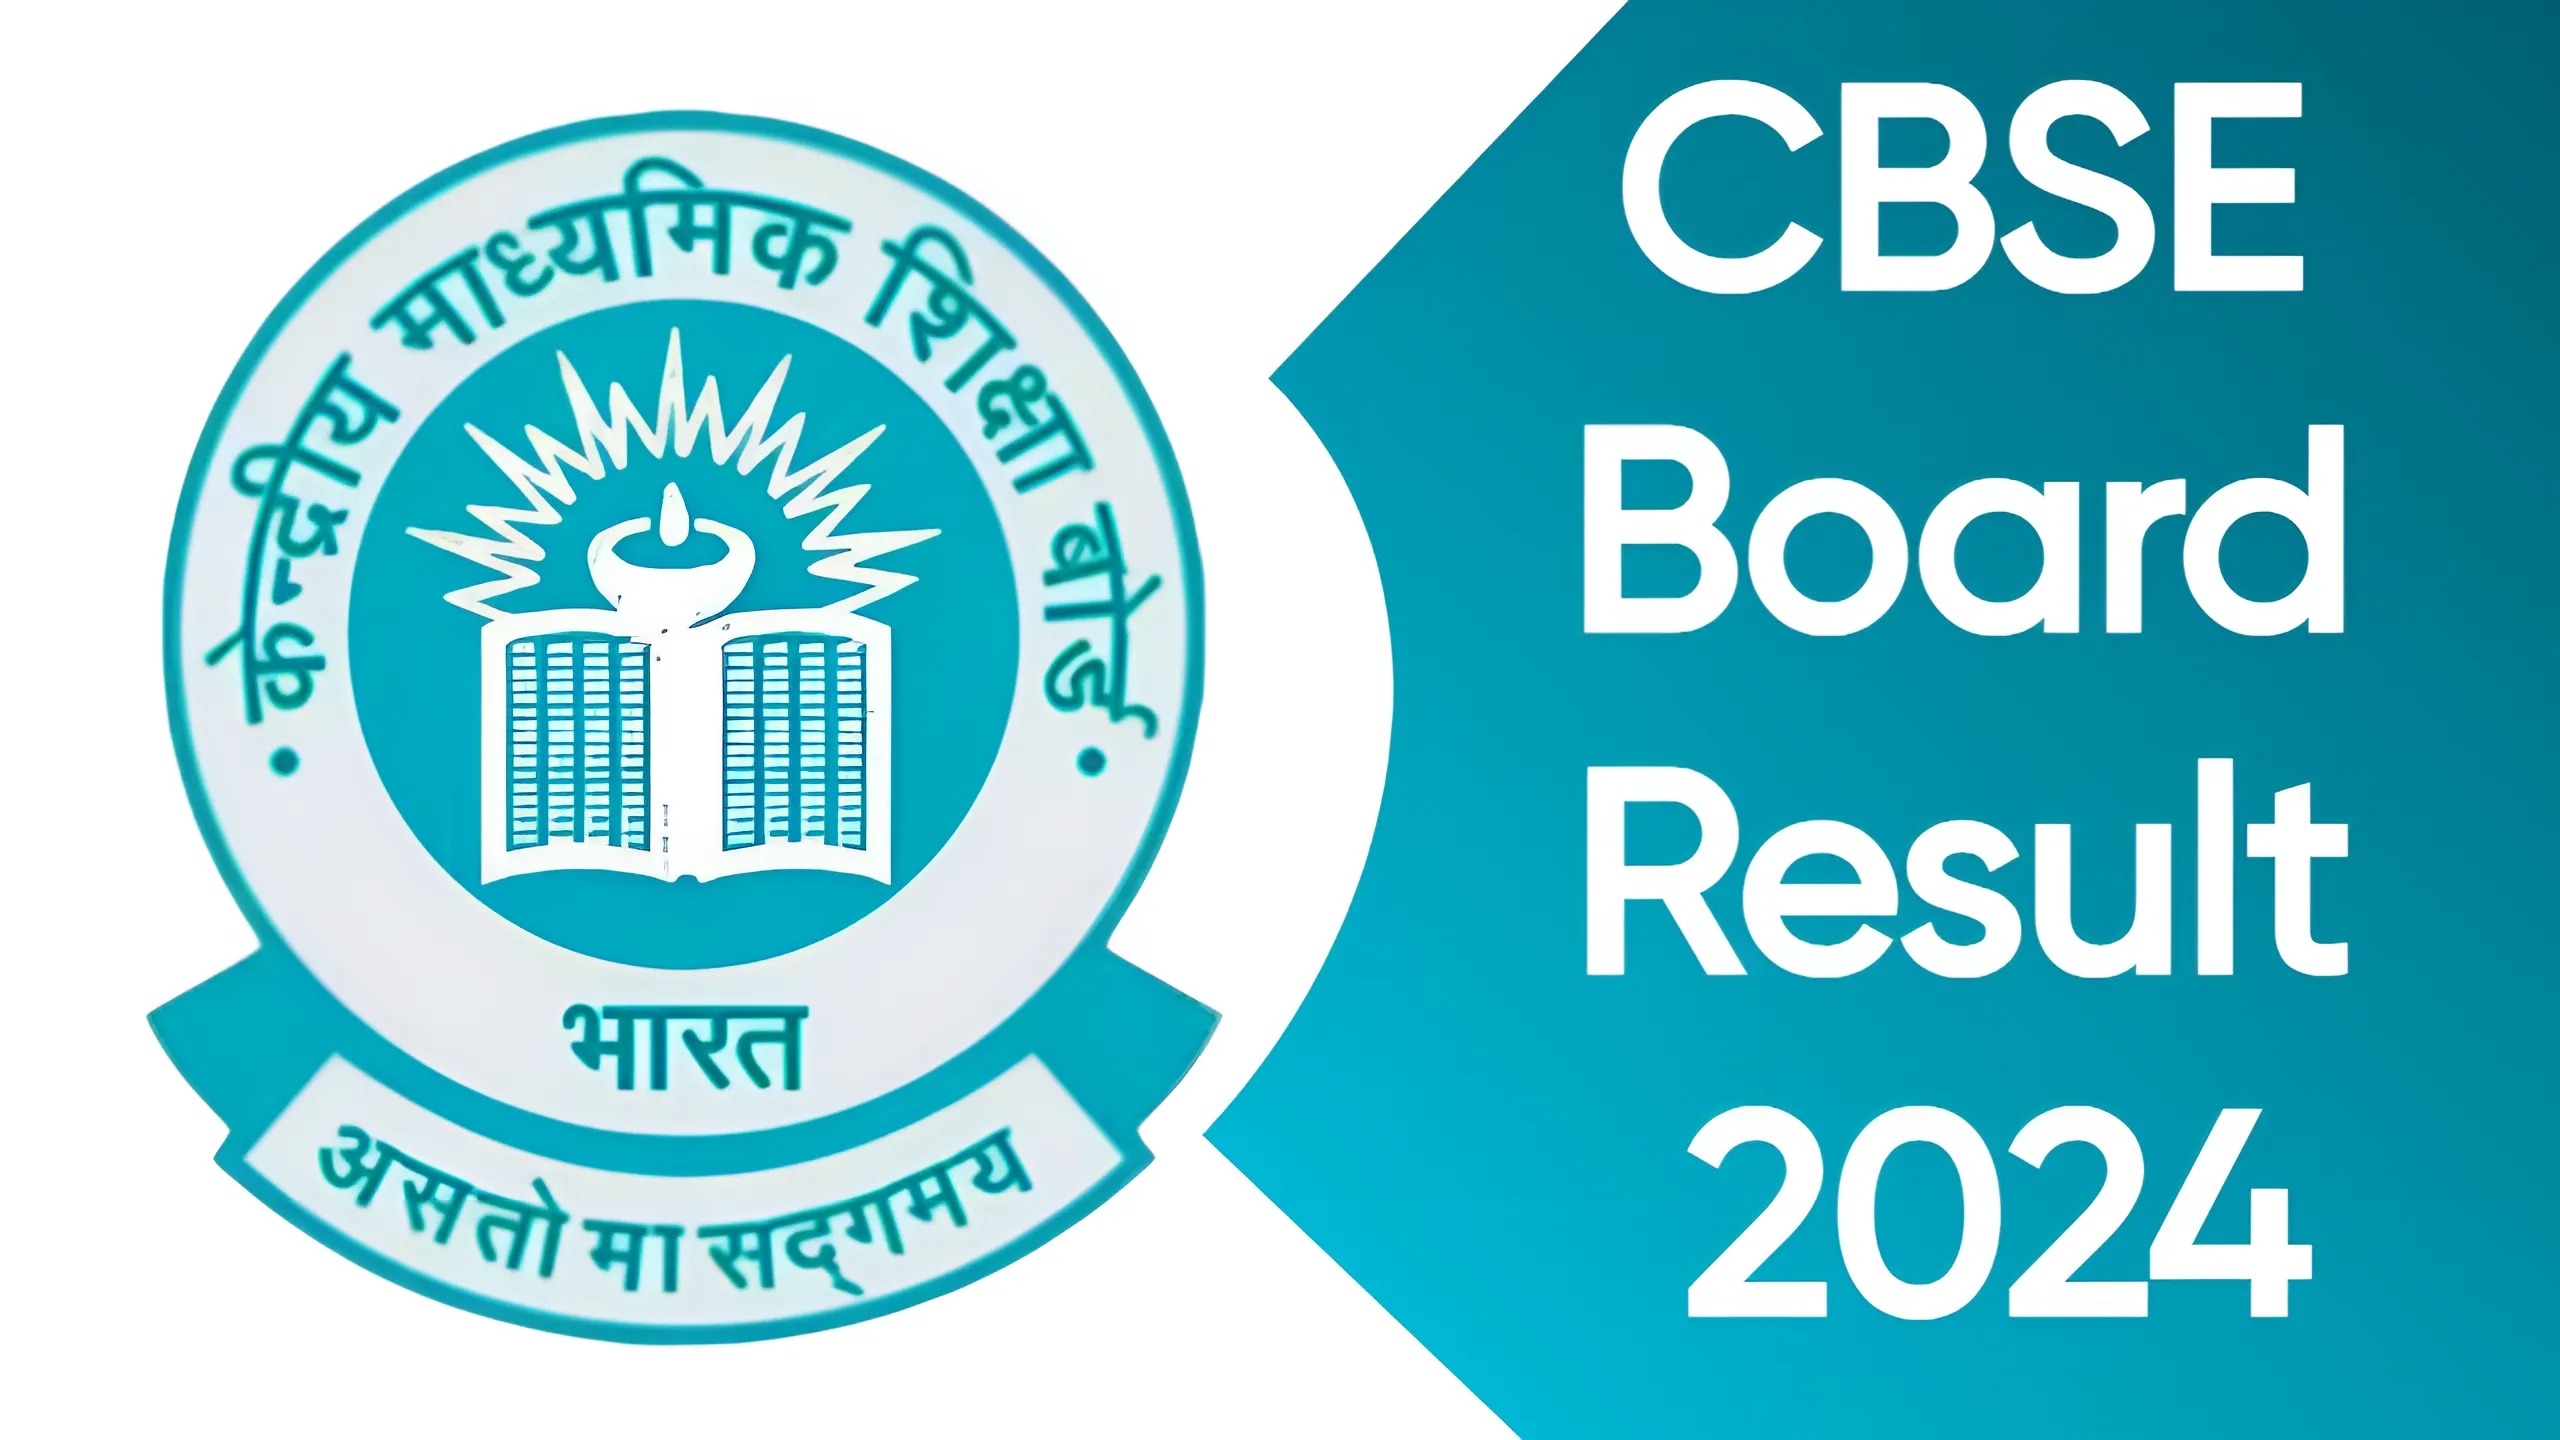 CBSE Board 10th 12th Result 2024, CBSE 12th Result 2024 Link